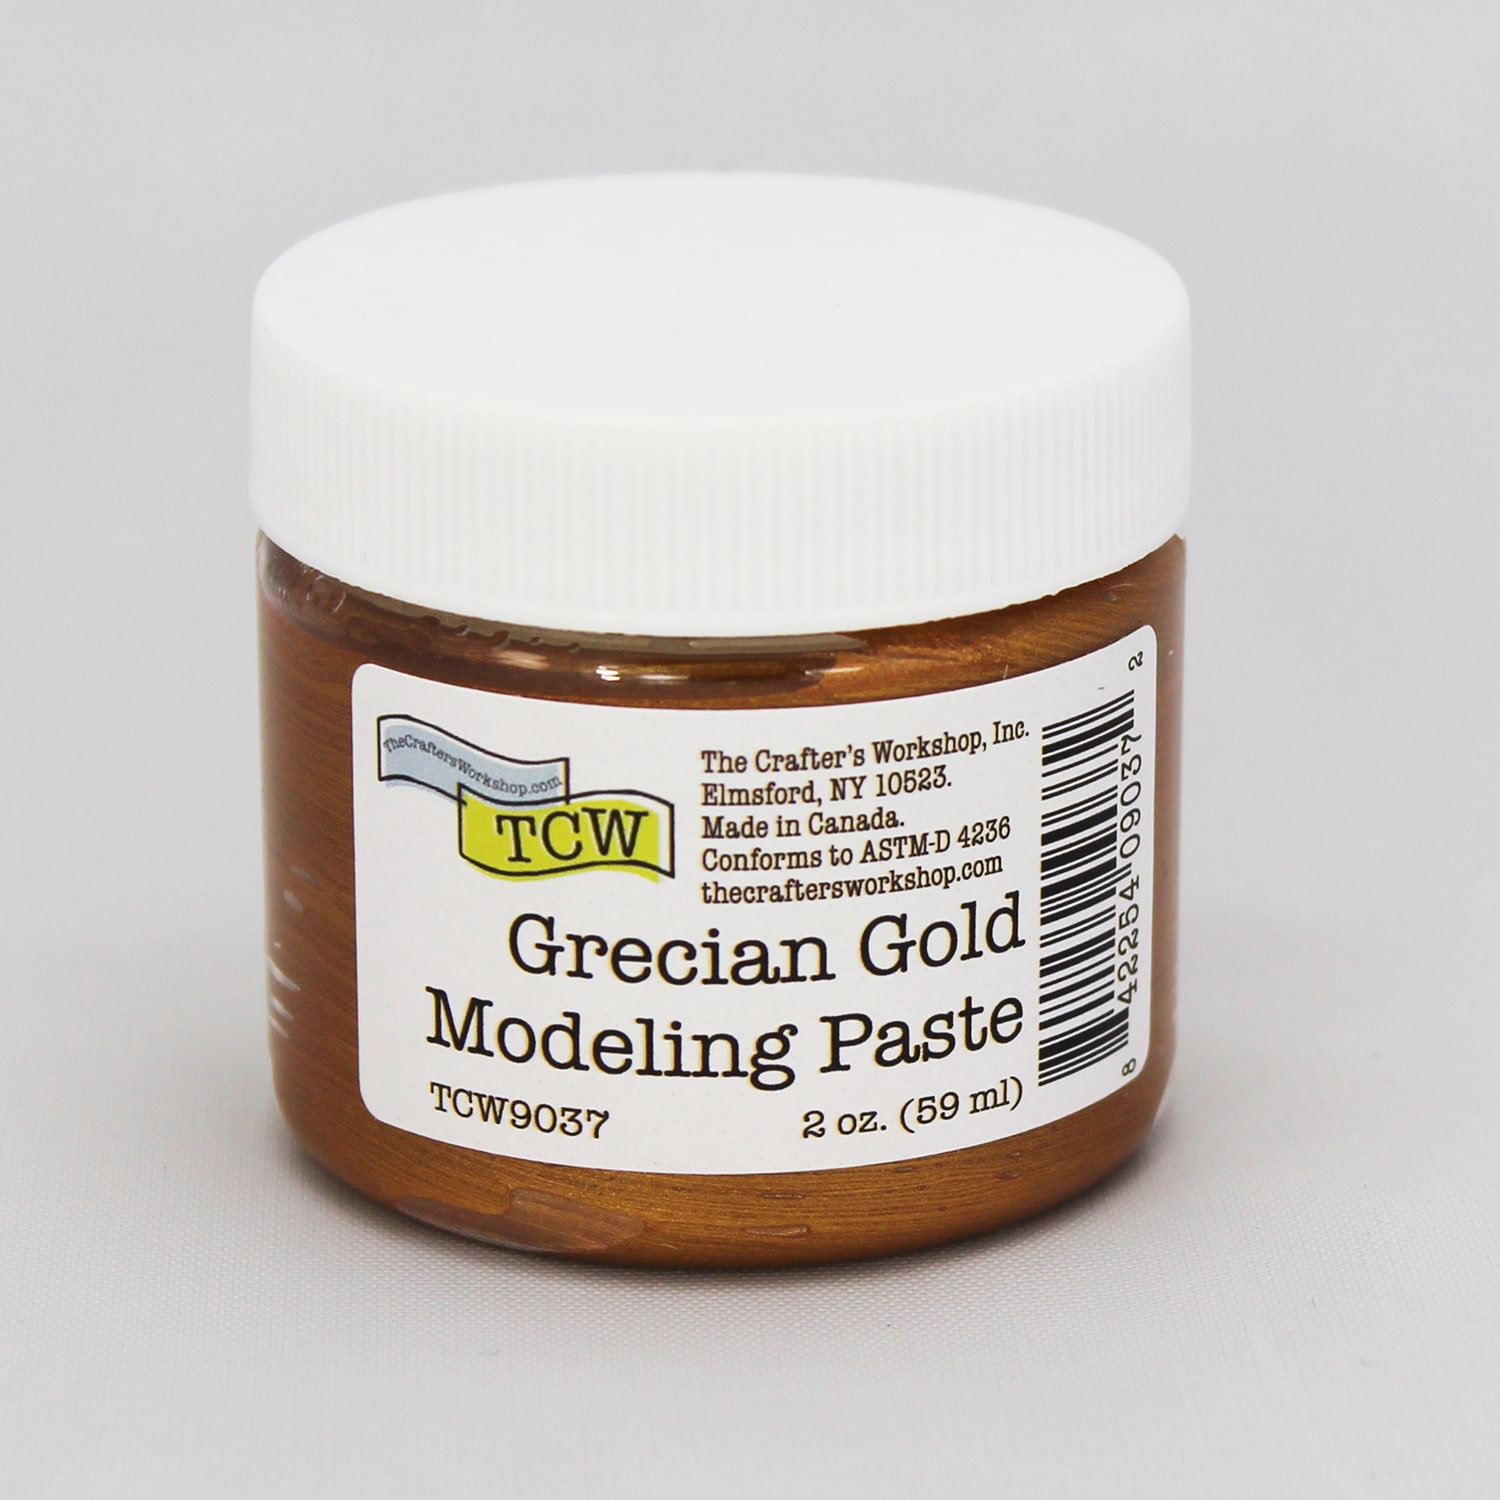 TCW9037 Grecian Gold Modeling Paste 2 oz. The Crafter's